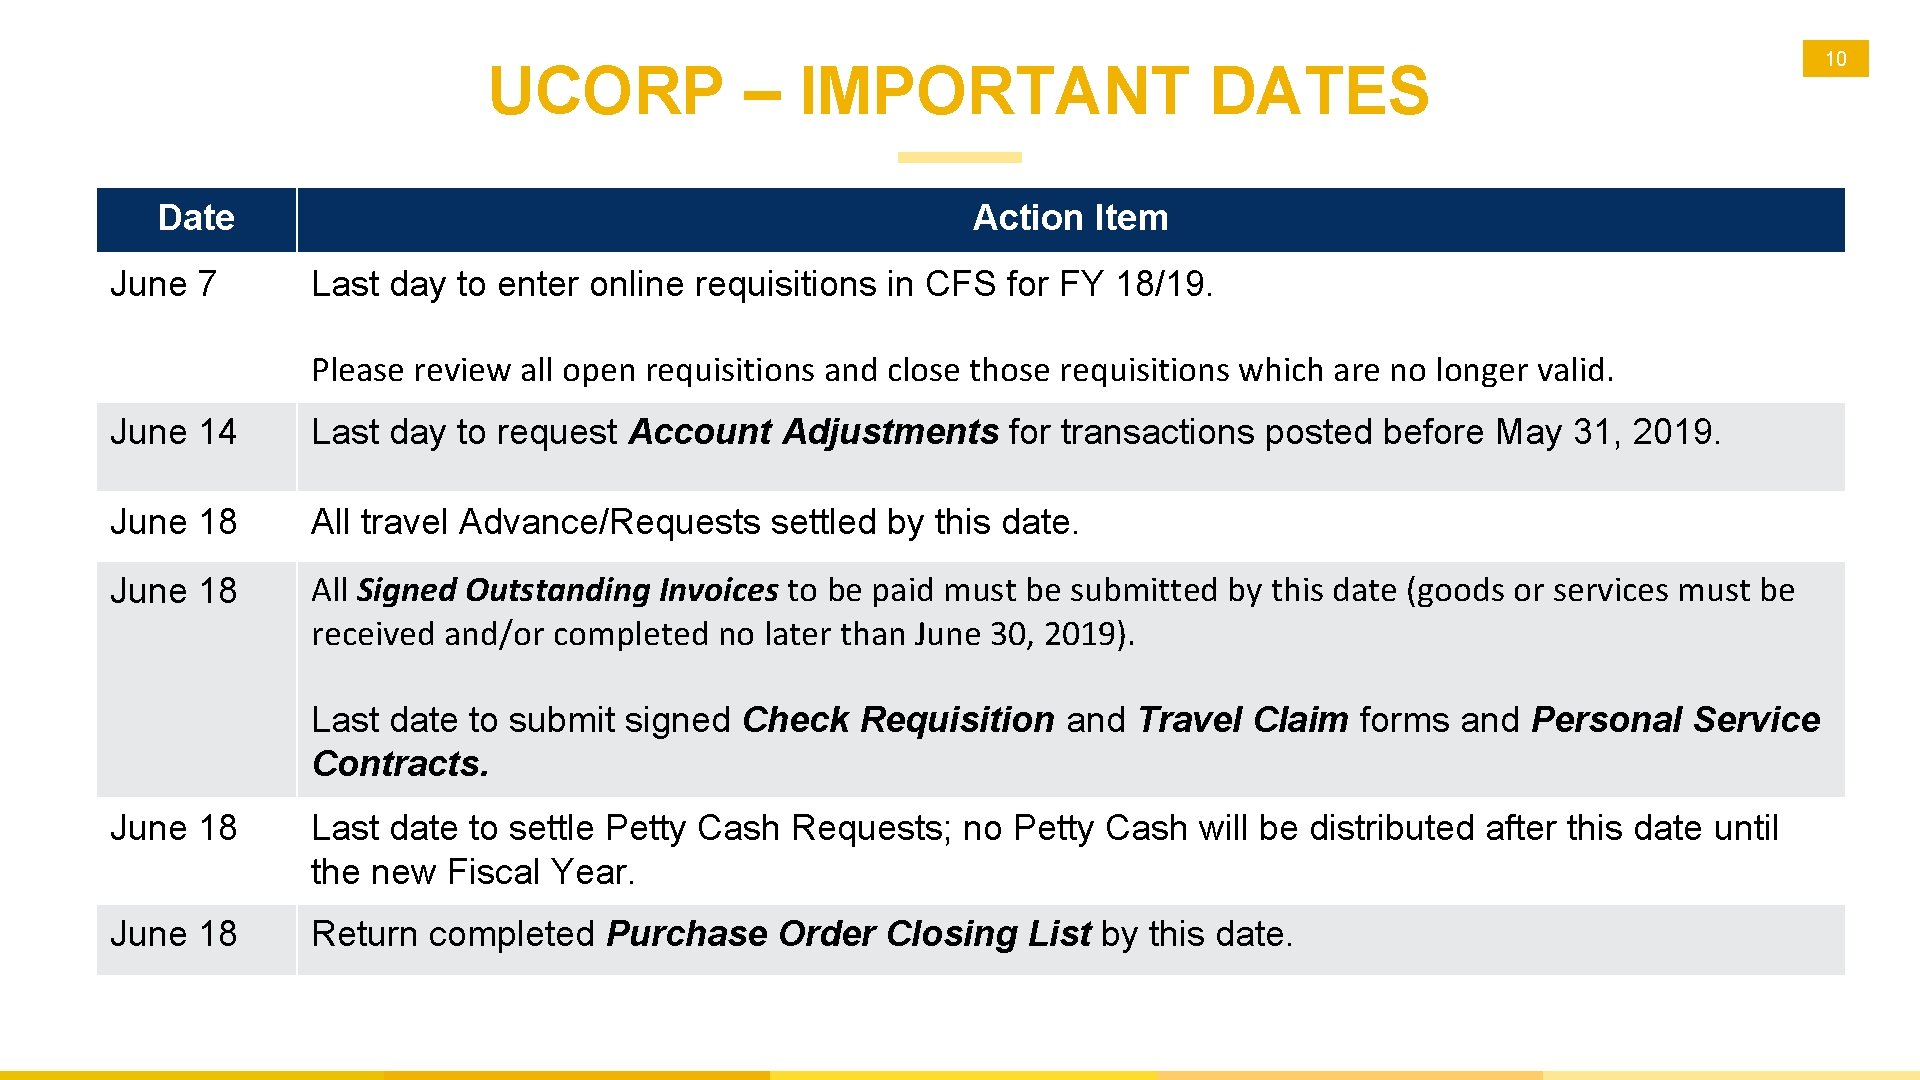 UCORP – IMPORTANT DATES Date June 7 Action Item Last day to enter online